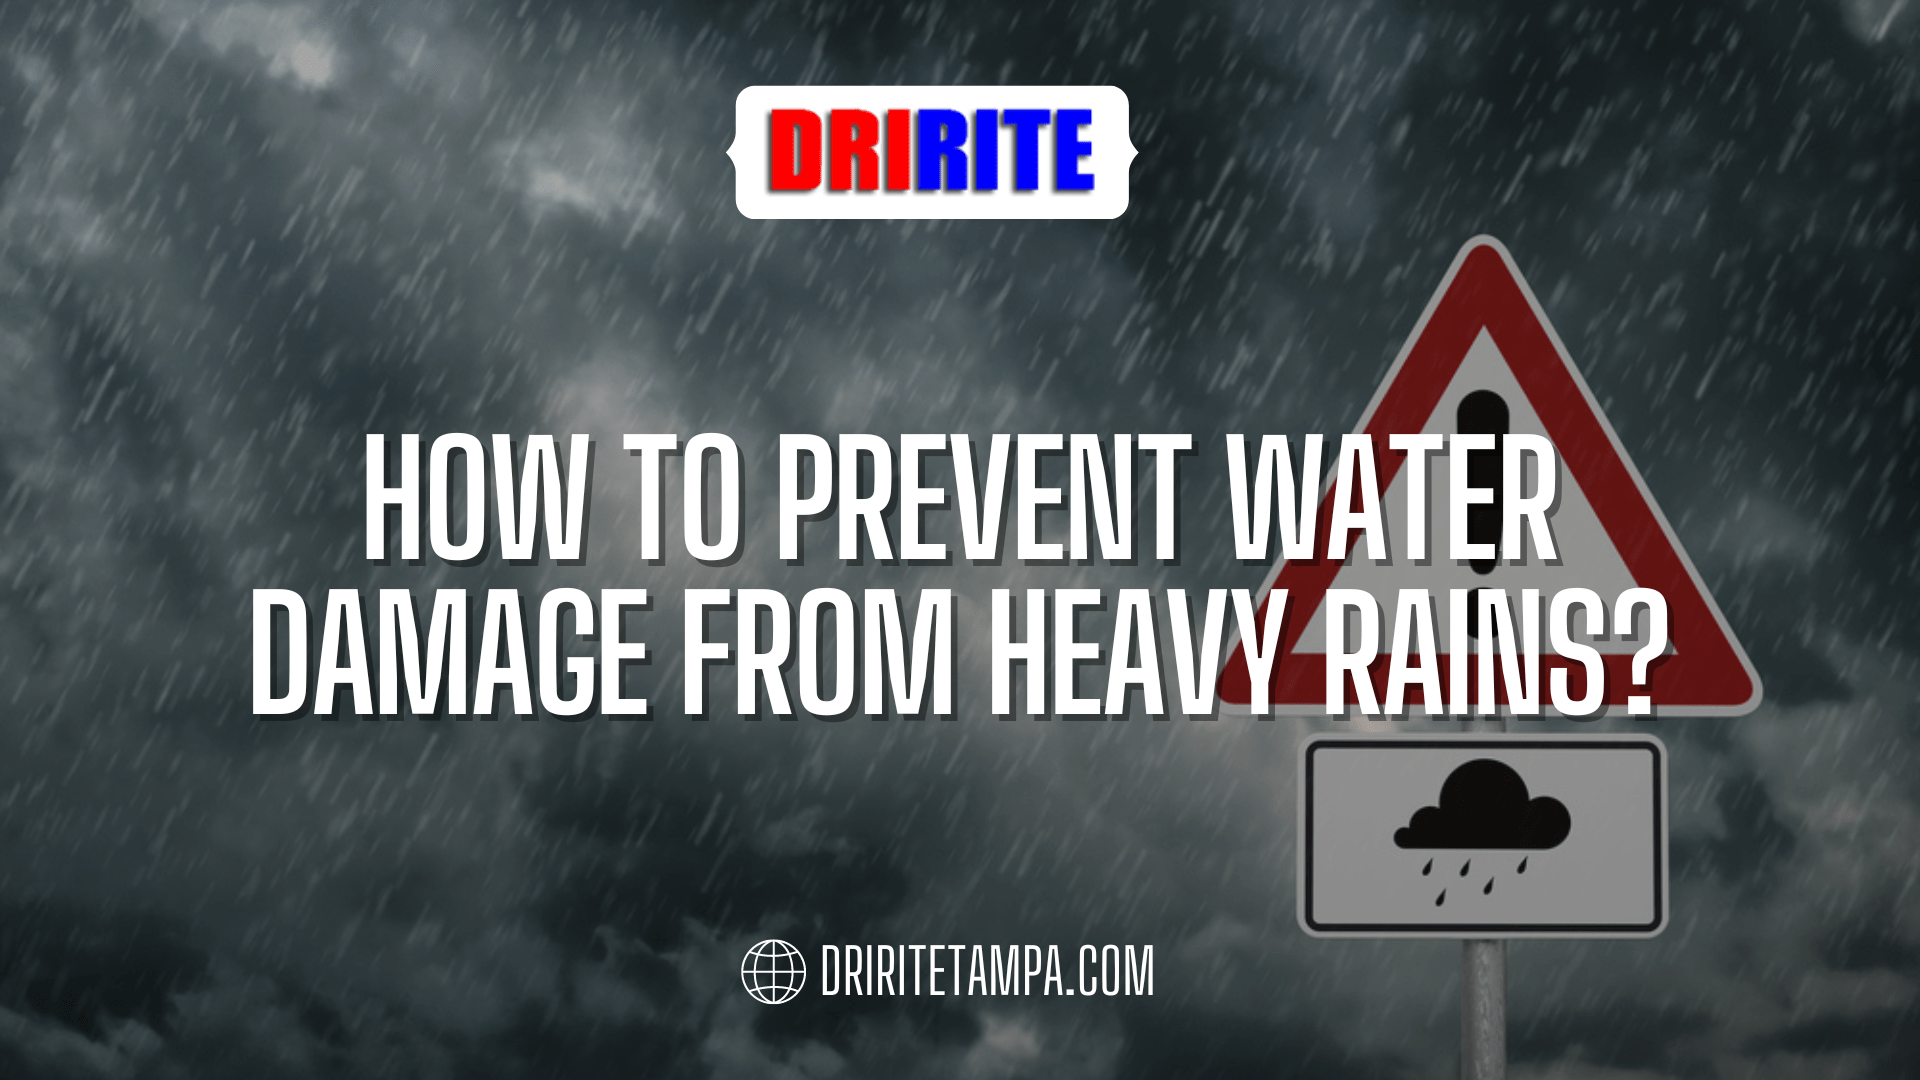 How to Prevent Water Damage From Heavy Rains